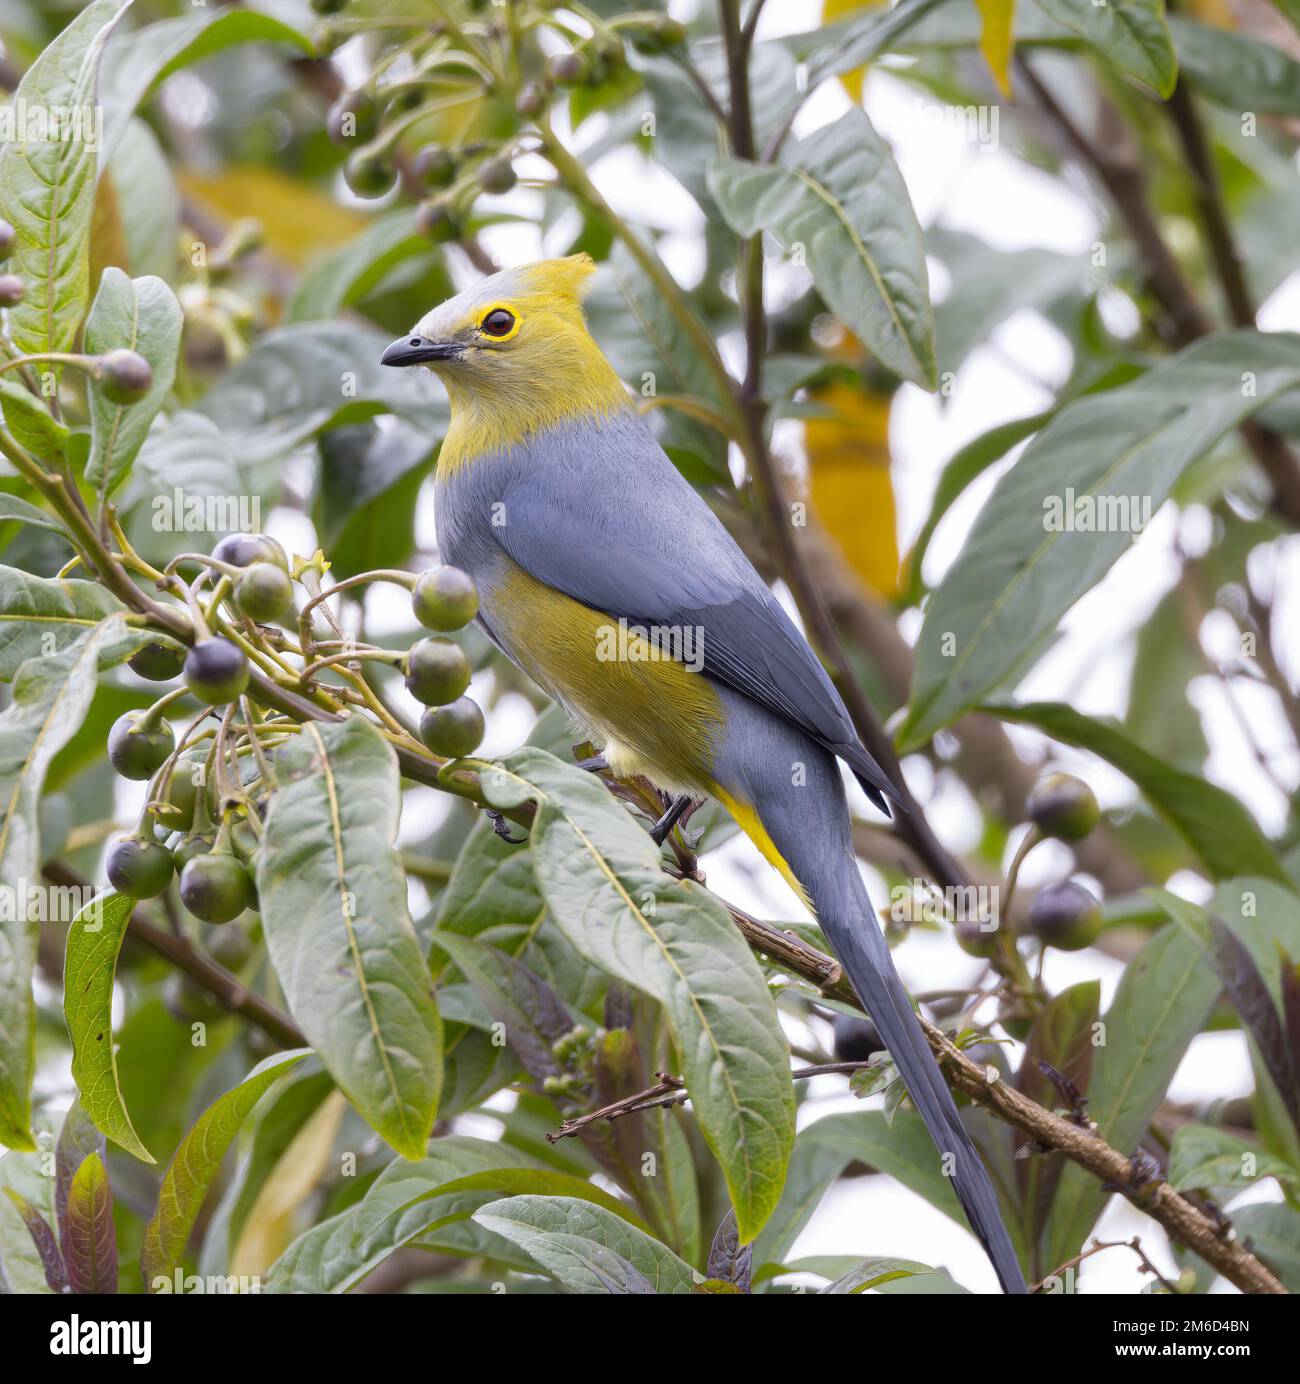 long-tailed silky-flycatcher trying to eat berries at a garden in costa rica Stock Photo